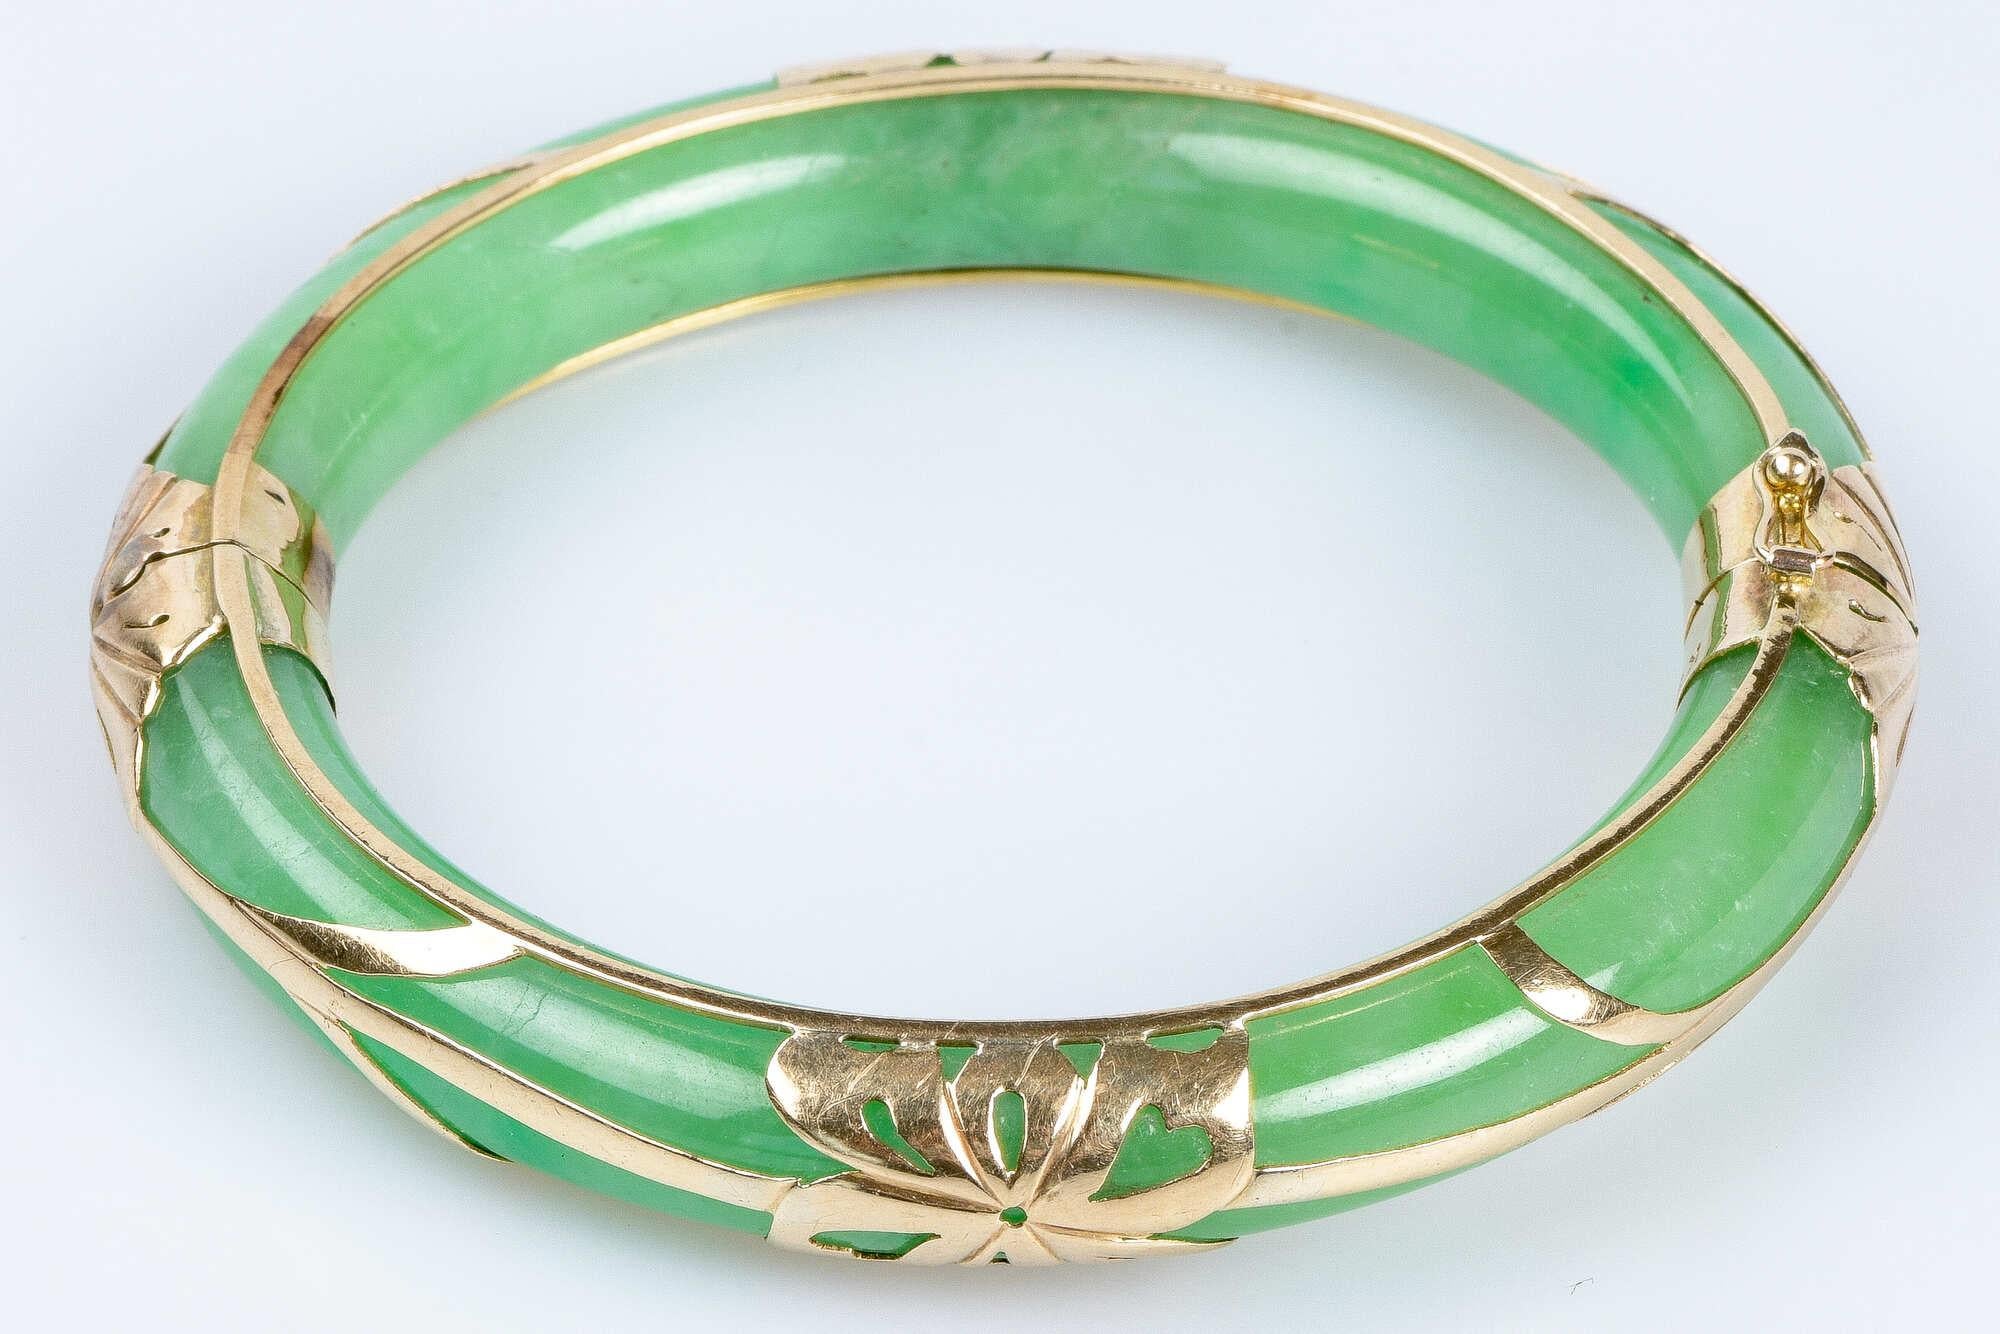 Rigid jade bangle bracelet with 9 carat yellow gold decorations. This bracelet has a curved shape that hugs the wrist and a clasp that allows you to put it on and remove it very easily while ensuring a safe and comfortable fit. The design and